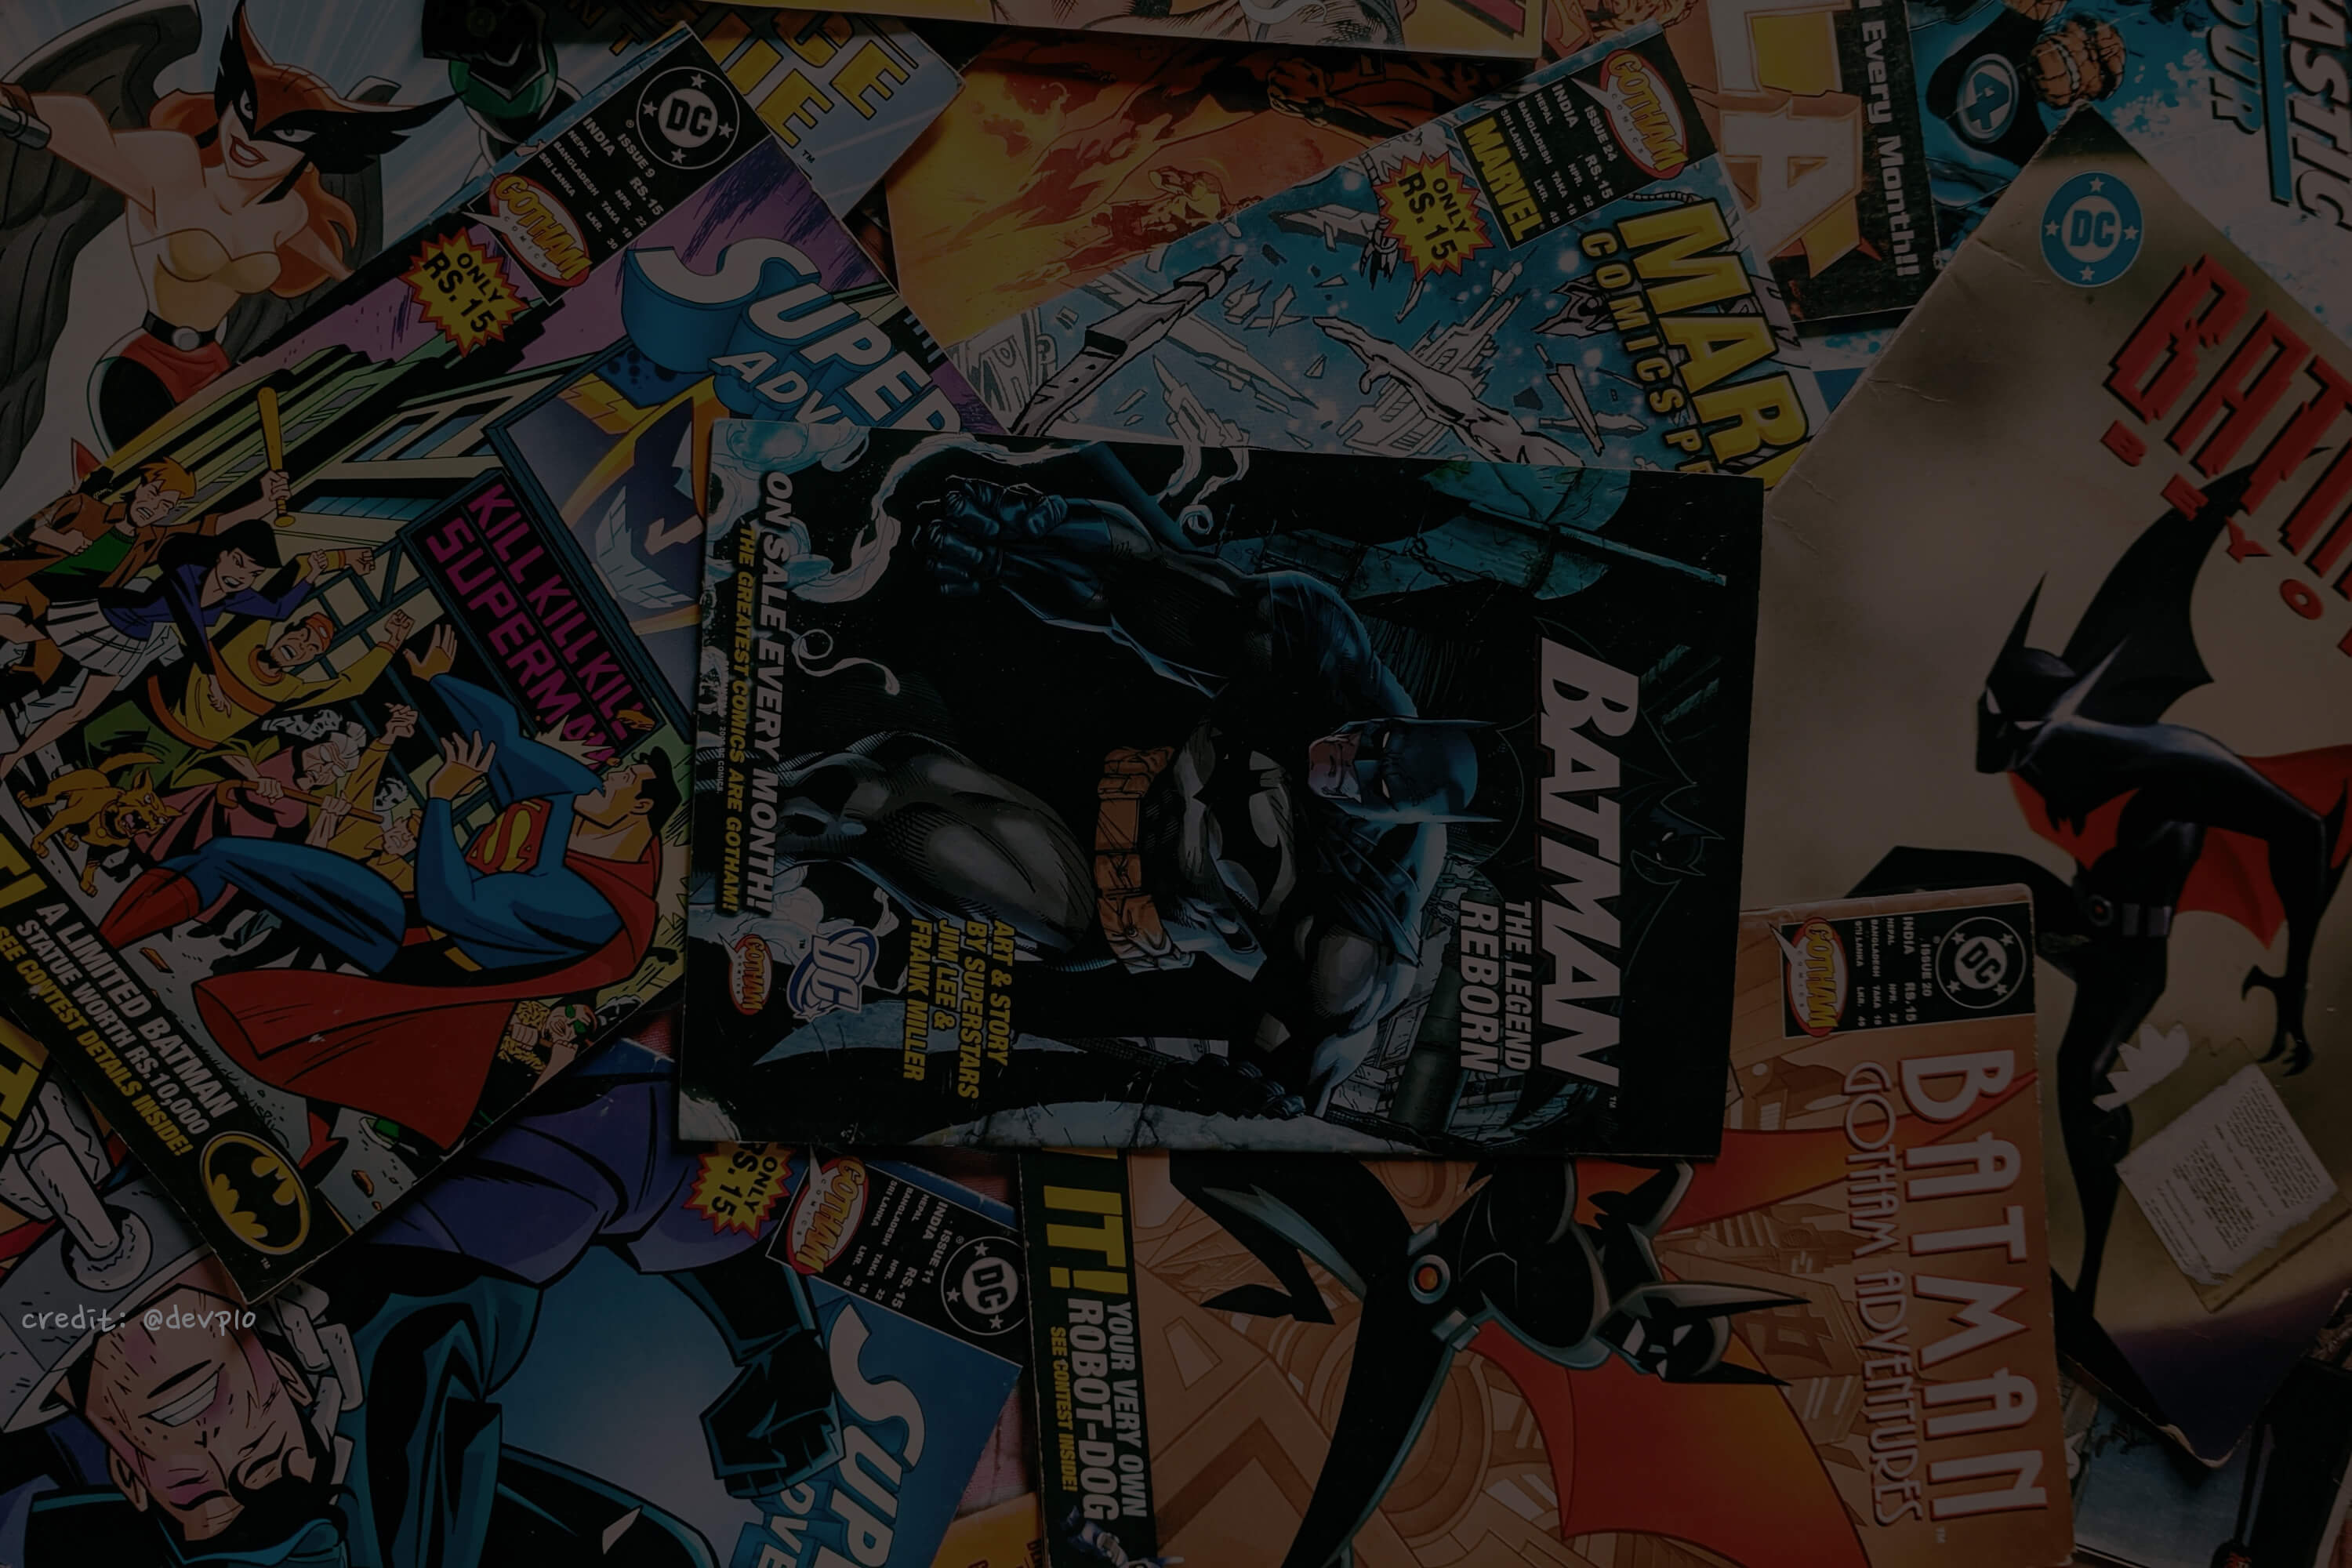 multiple comic books scattered around